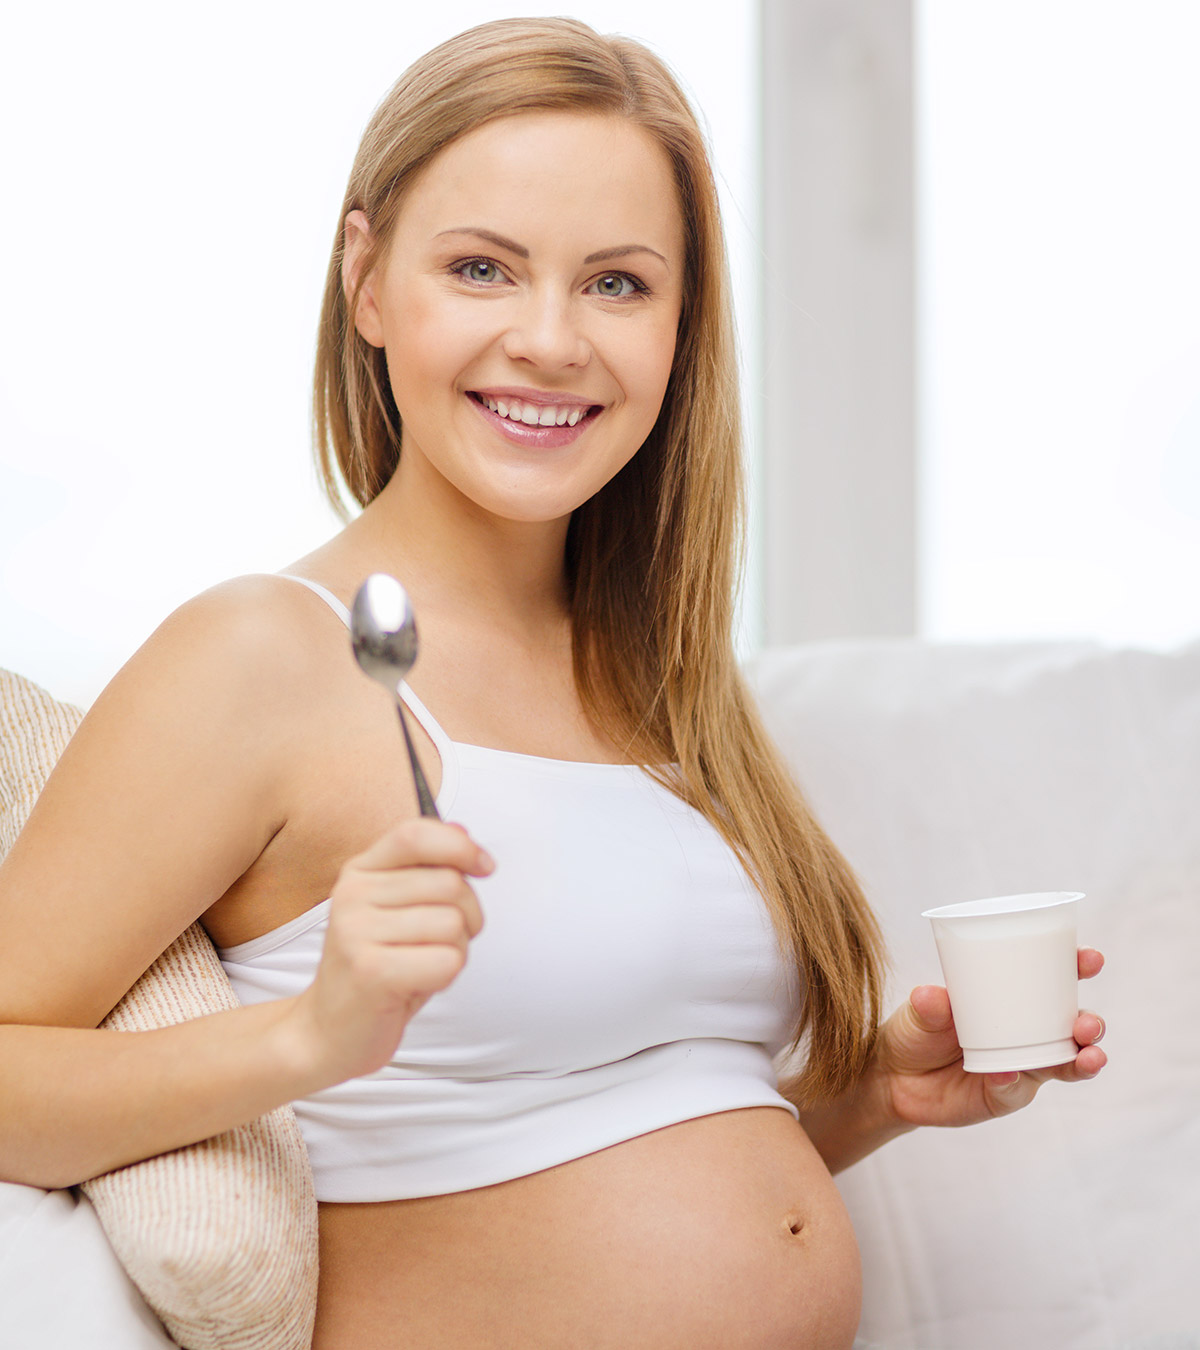 5 Amazing Health Benefits Of Consuming Activia During Pregnancy